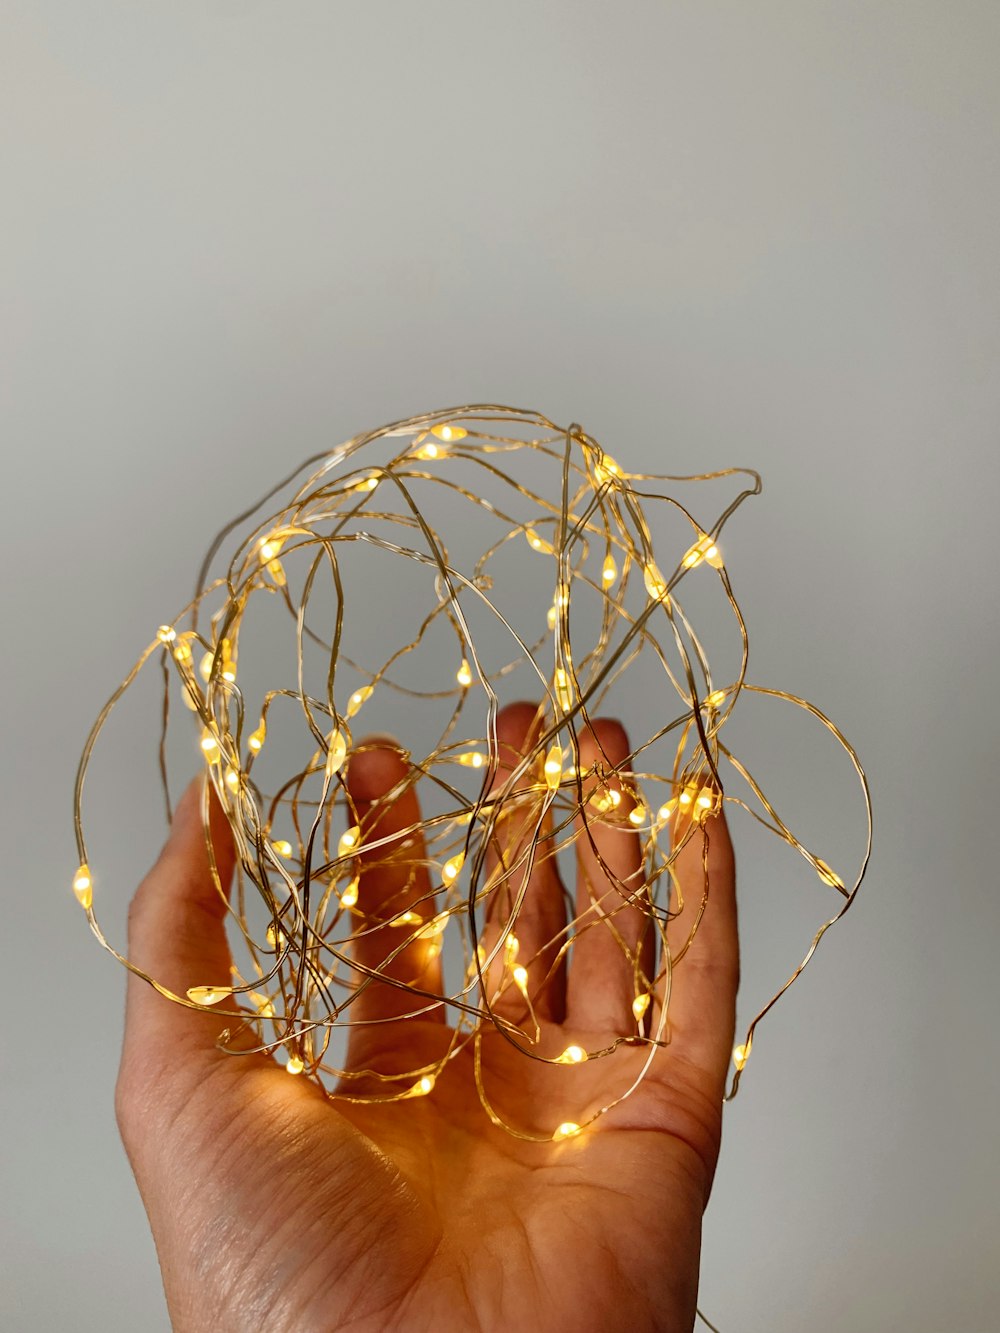 a hand holding a ball of string lights